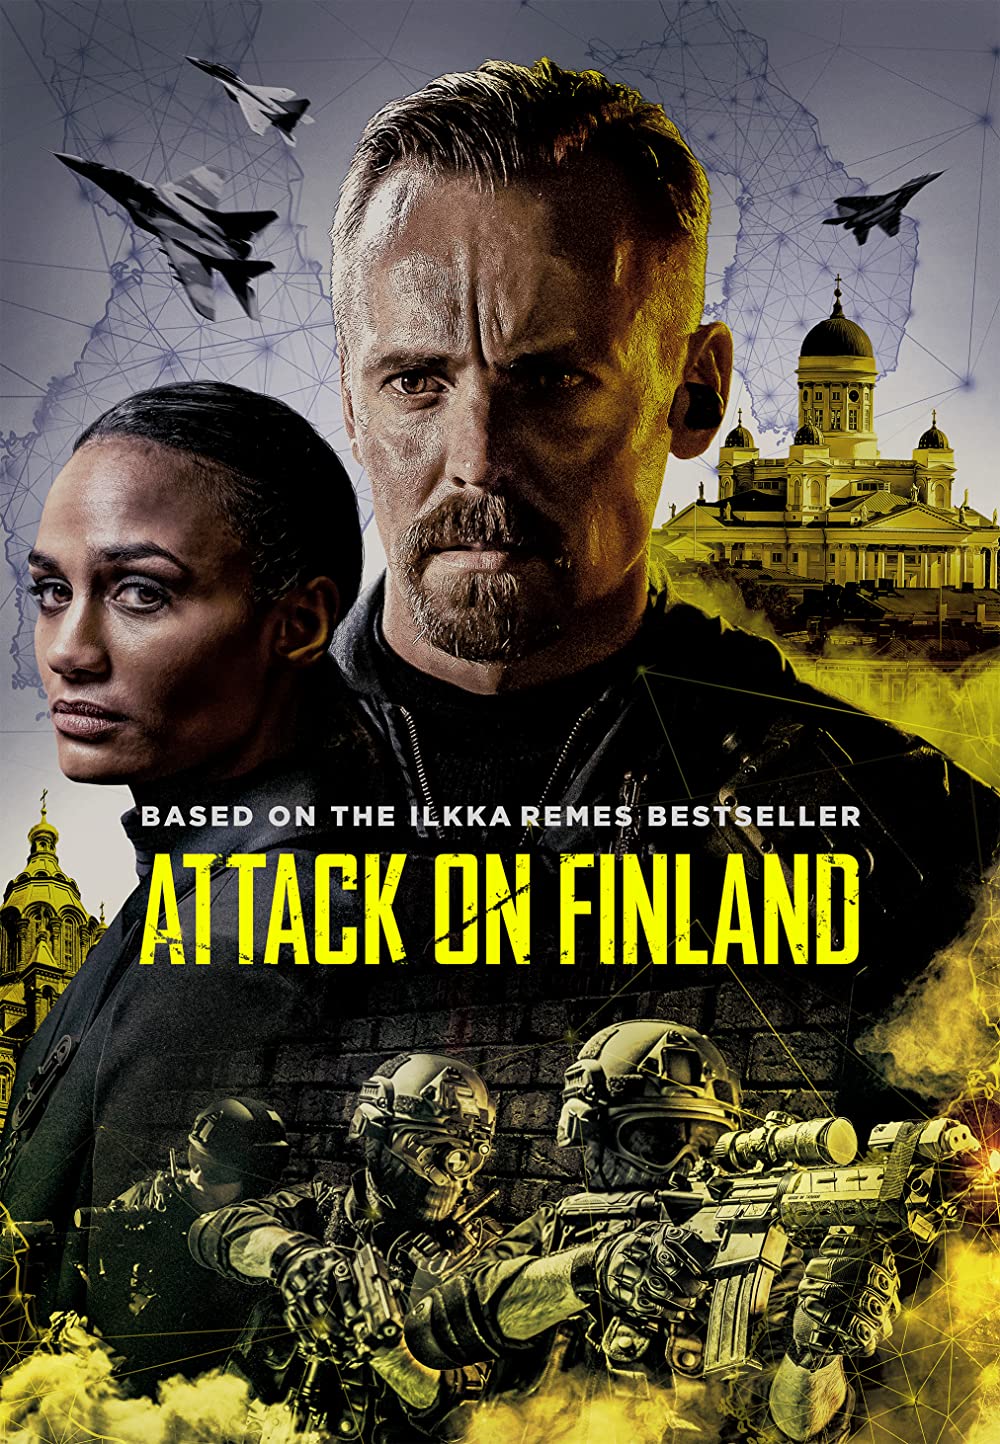 Attack on Finland (2021) - 1080p WEB-DL DD5 1 H 264 (NLsub) (Zonder hardcoded engelse subs)